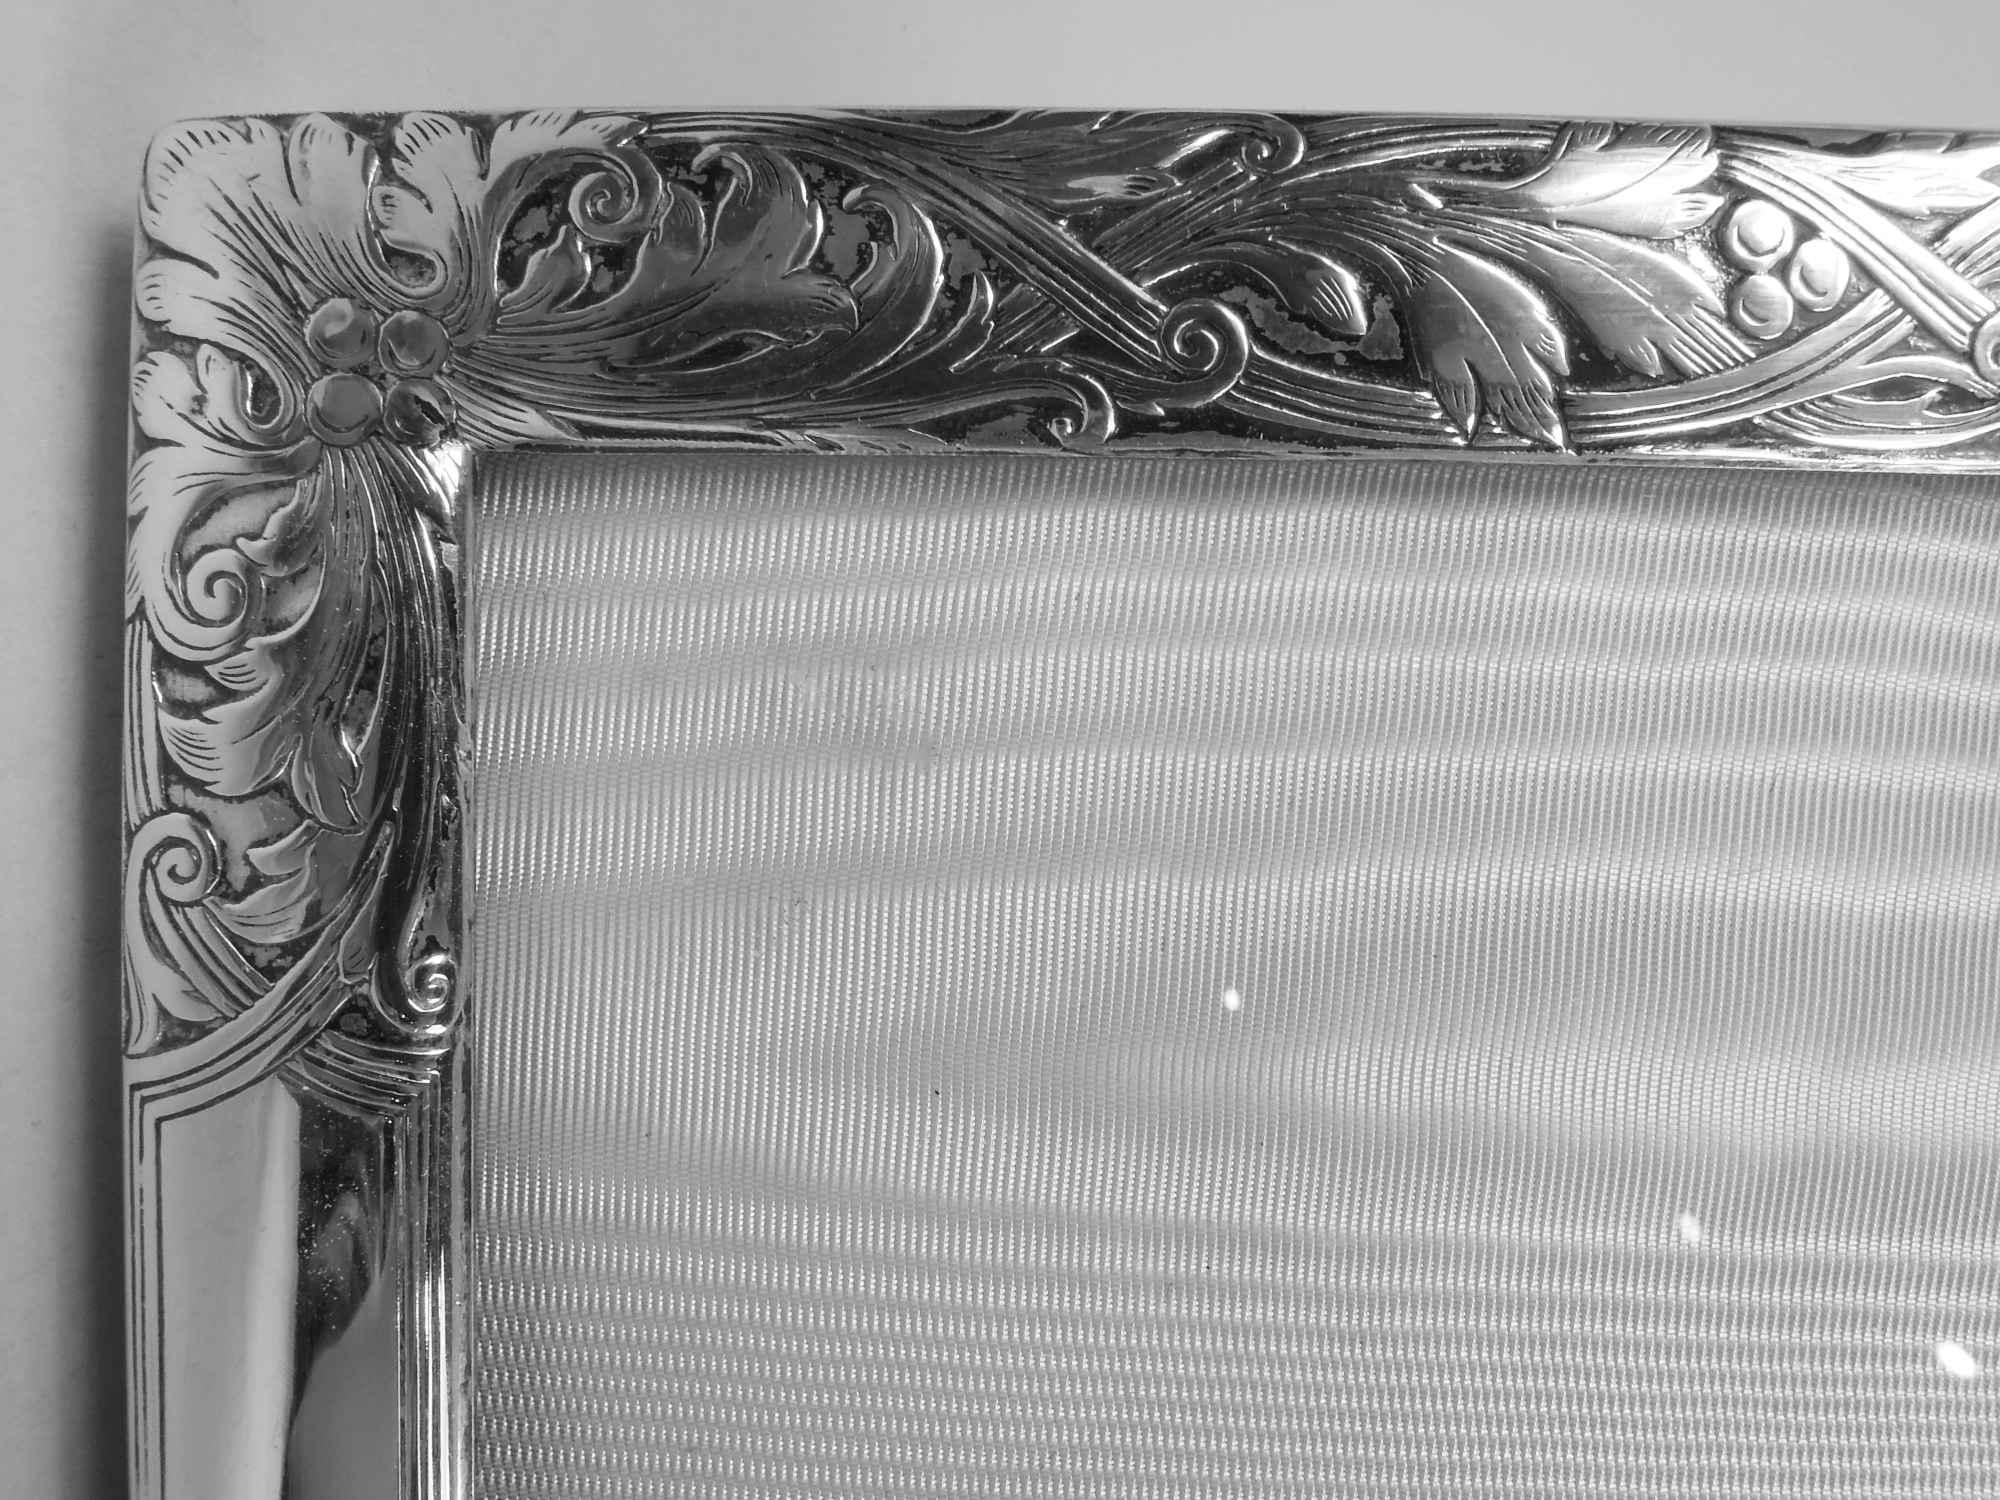 Edwardian Art Nouveau sterling silver picture frame. Made by William B. Kerr in Newark, ca 1910. Rectangular window in surround with acid-etched ornament: Leaves and berries entwined with double scrolling bands. Rectangular cartouche (vacant). With